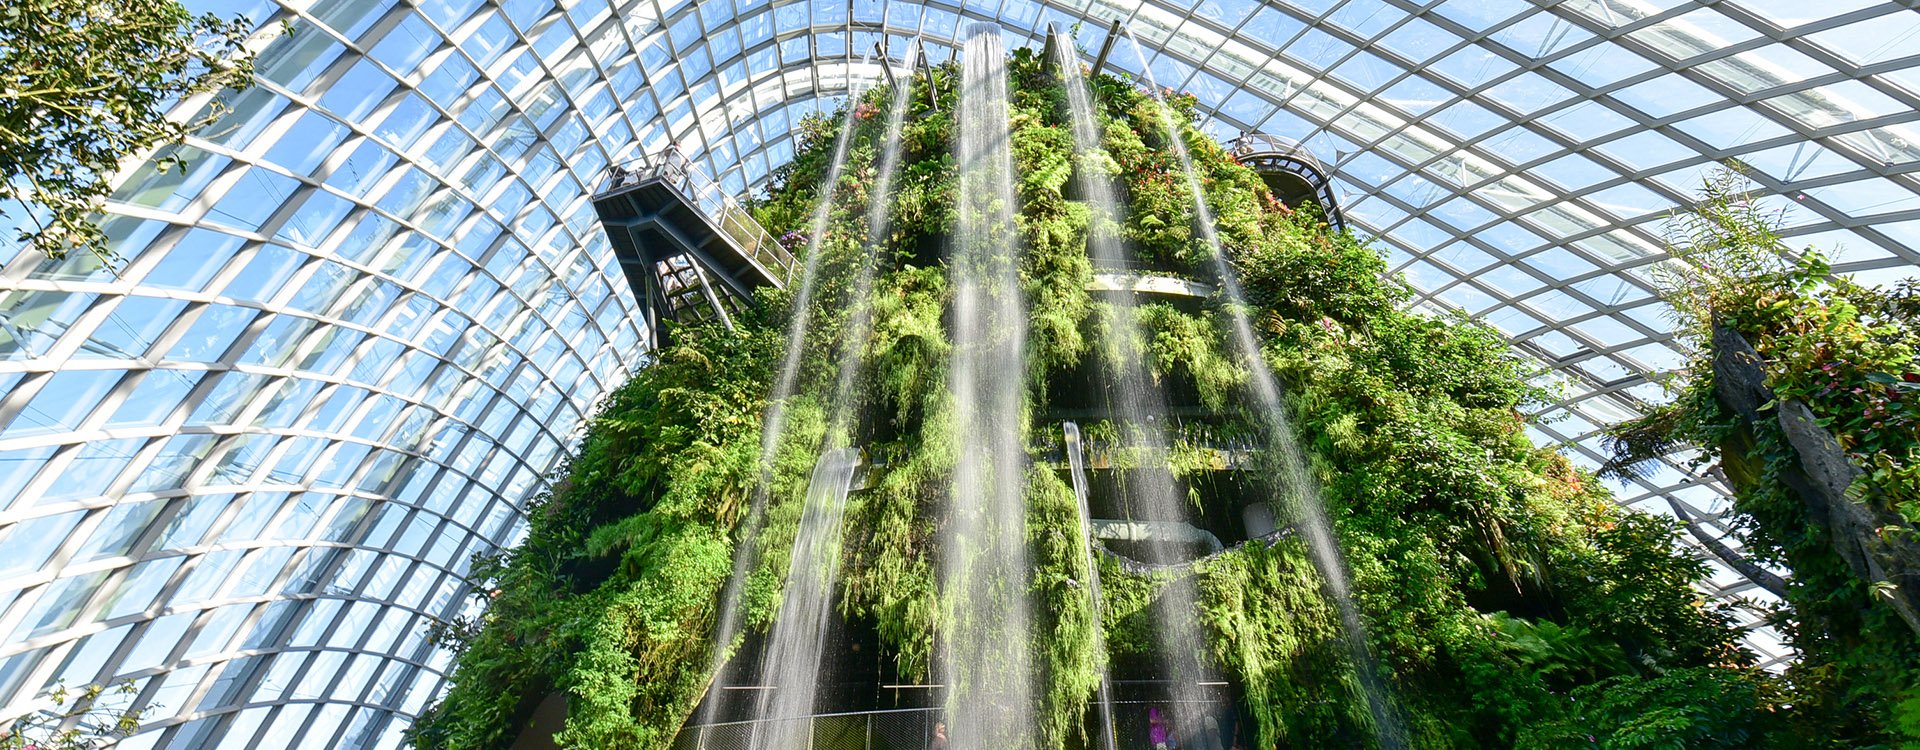 Inside of the Cloud Forest Dome with man made waterfall, Gardens by the Bay, Singapore